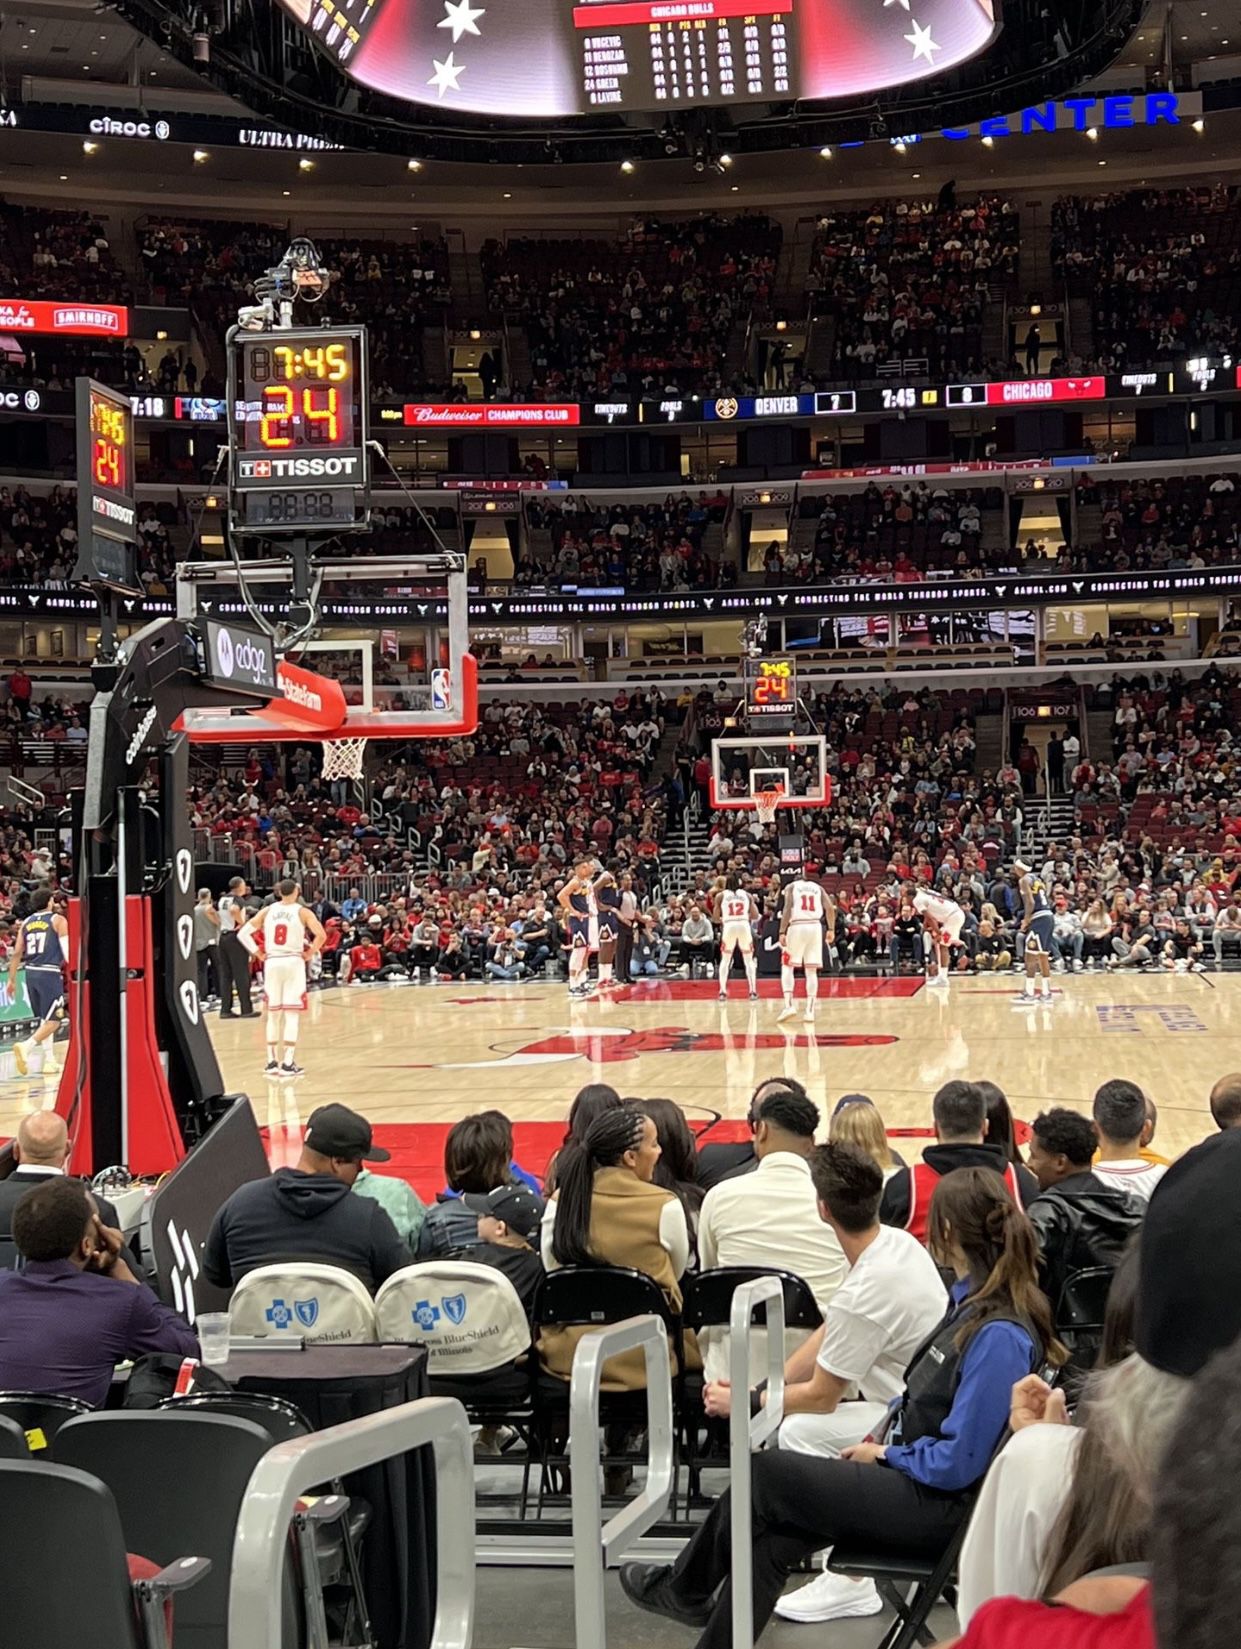 2 Tickets for Chicago Bulls